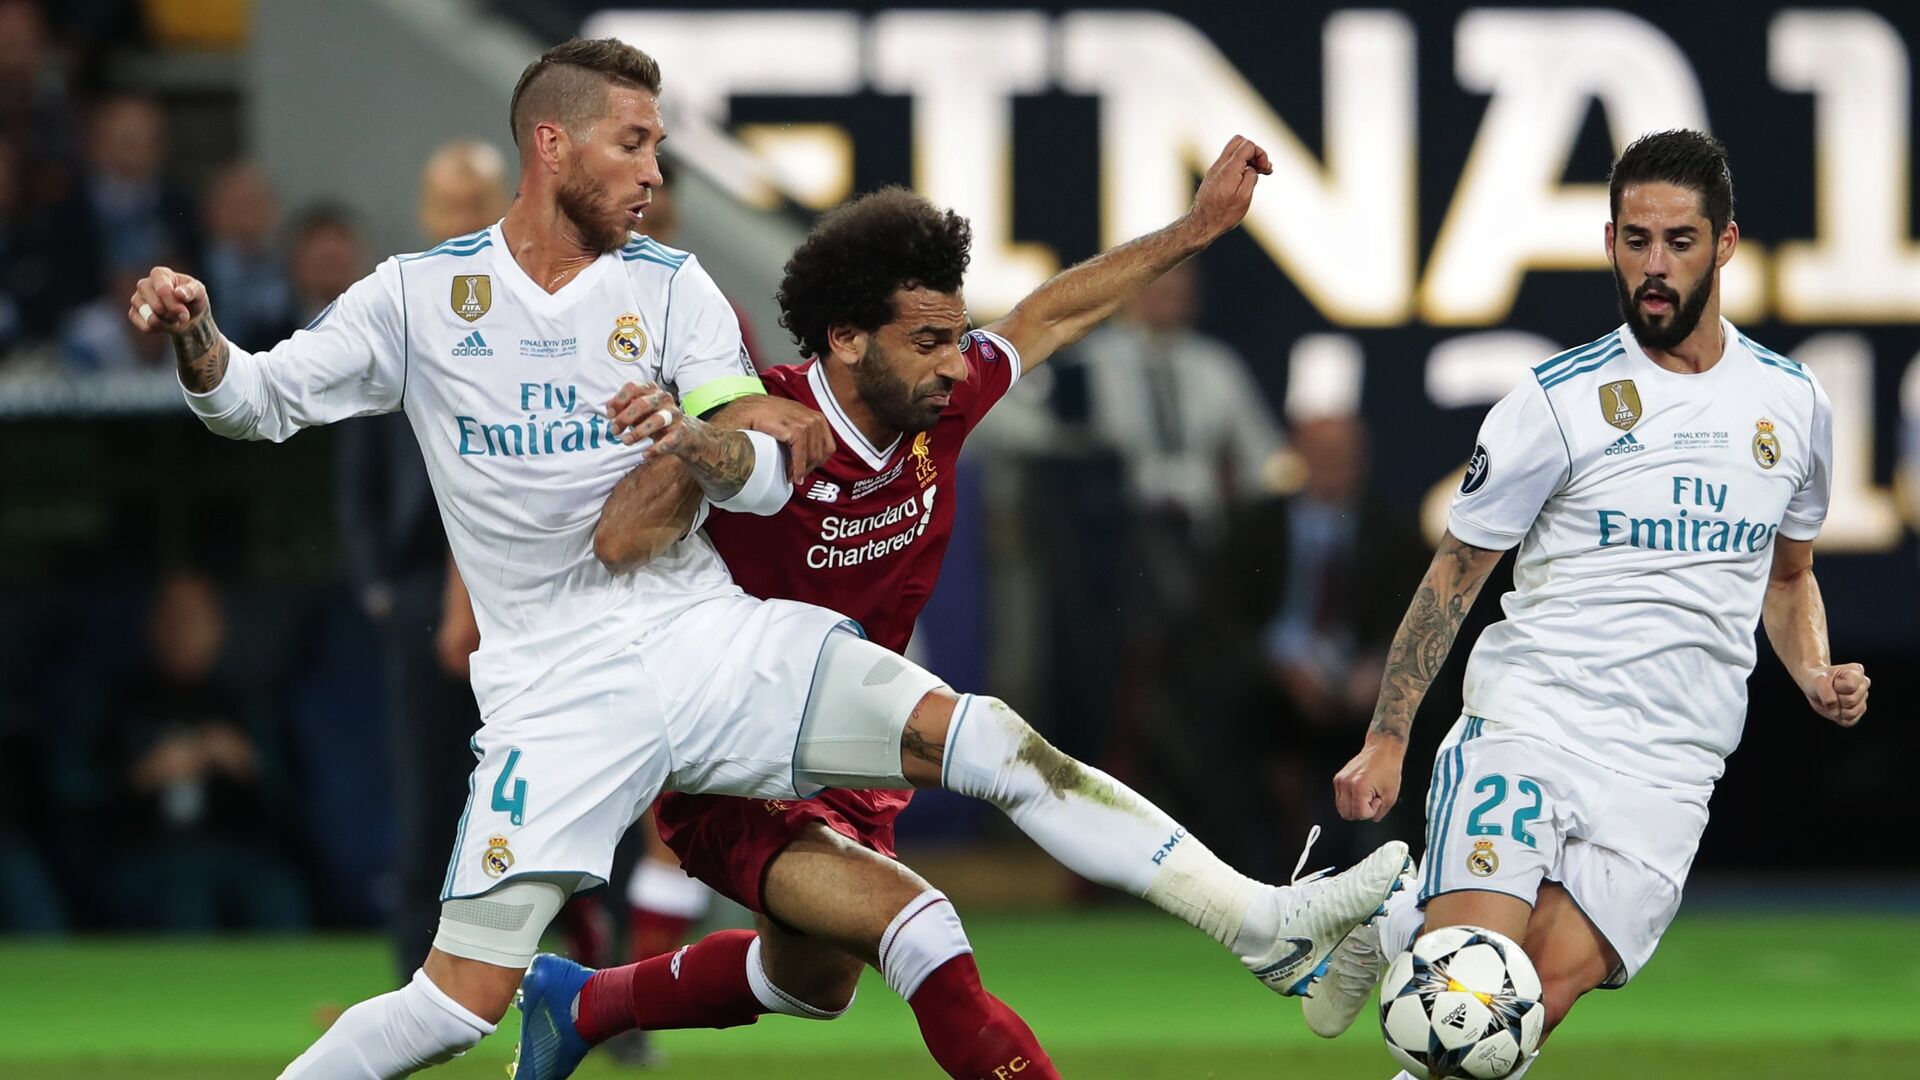 From left: Sergio Ramos from Real Madrid FC (Madrid, Spain), Mohamed Salah from Liverpool FC (Liverpool, England) and Isco from Real Madrid FC during the 2017-2018 UEFA Champions League final match between Liverpool FC and Real Madrid FC - اسپوتنیک افغانستان  , 1920, 11.01.2022